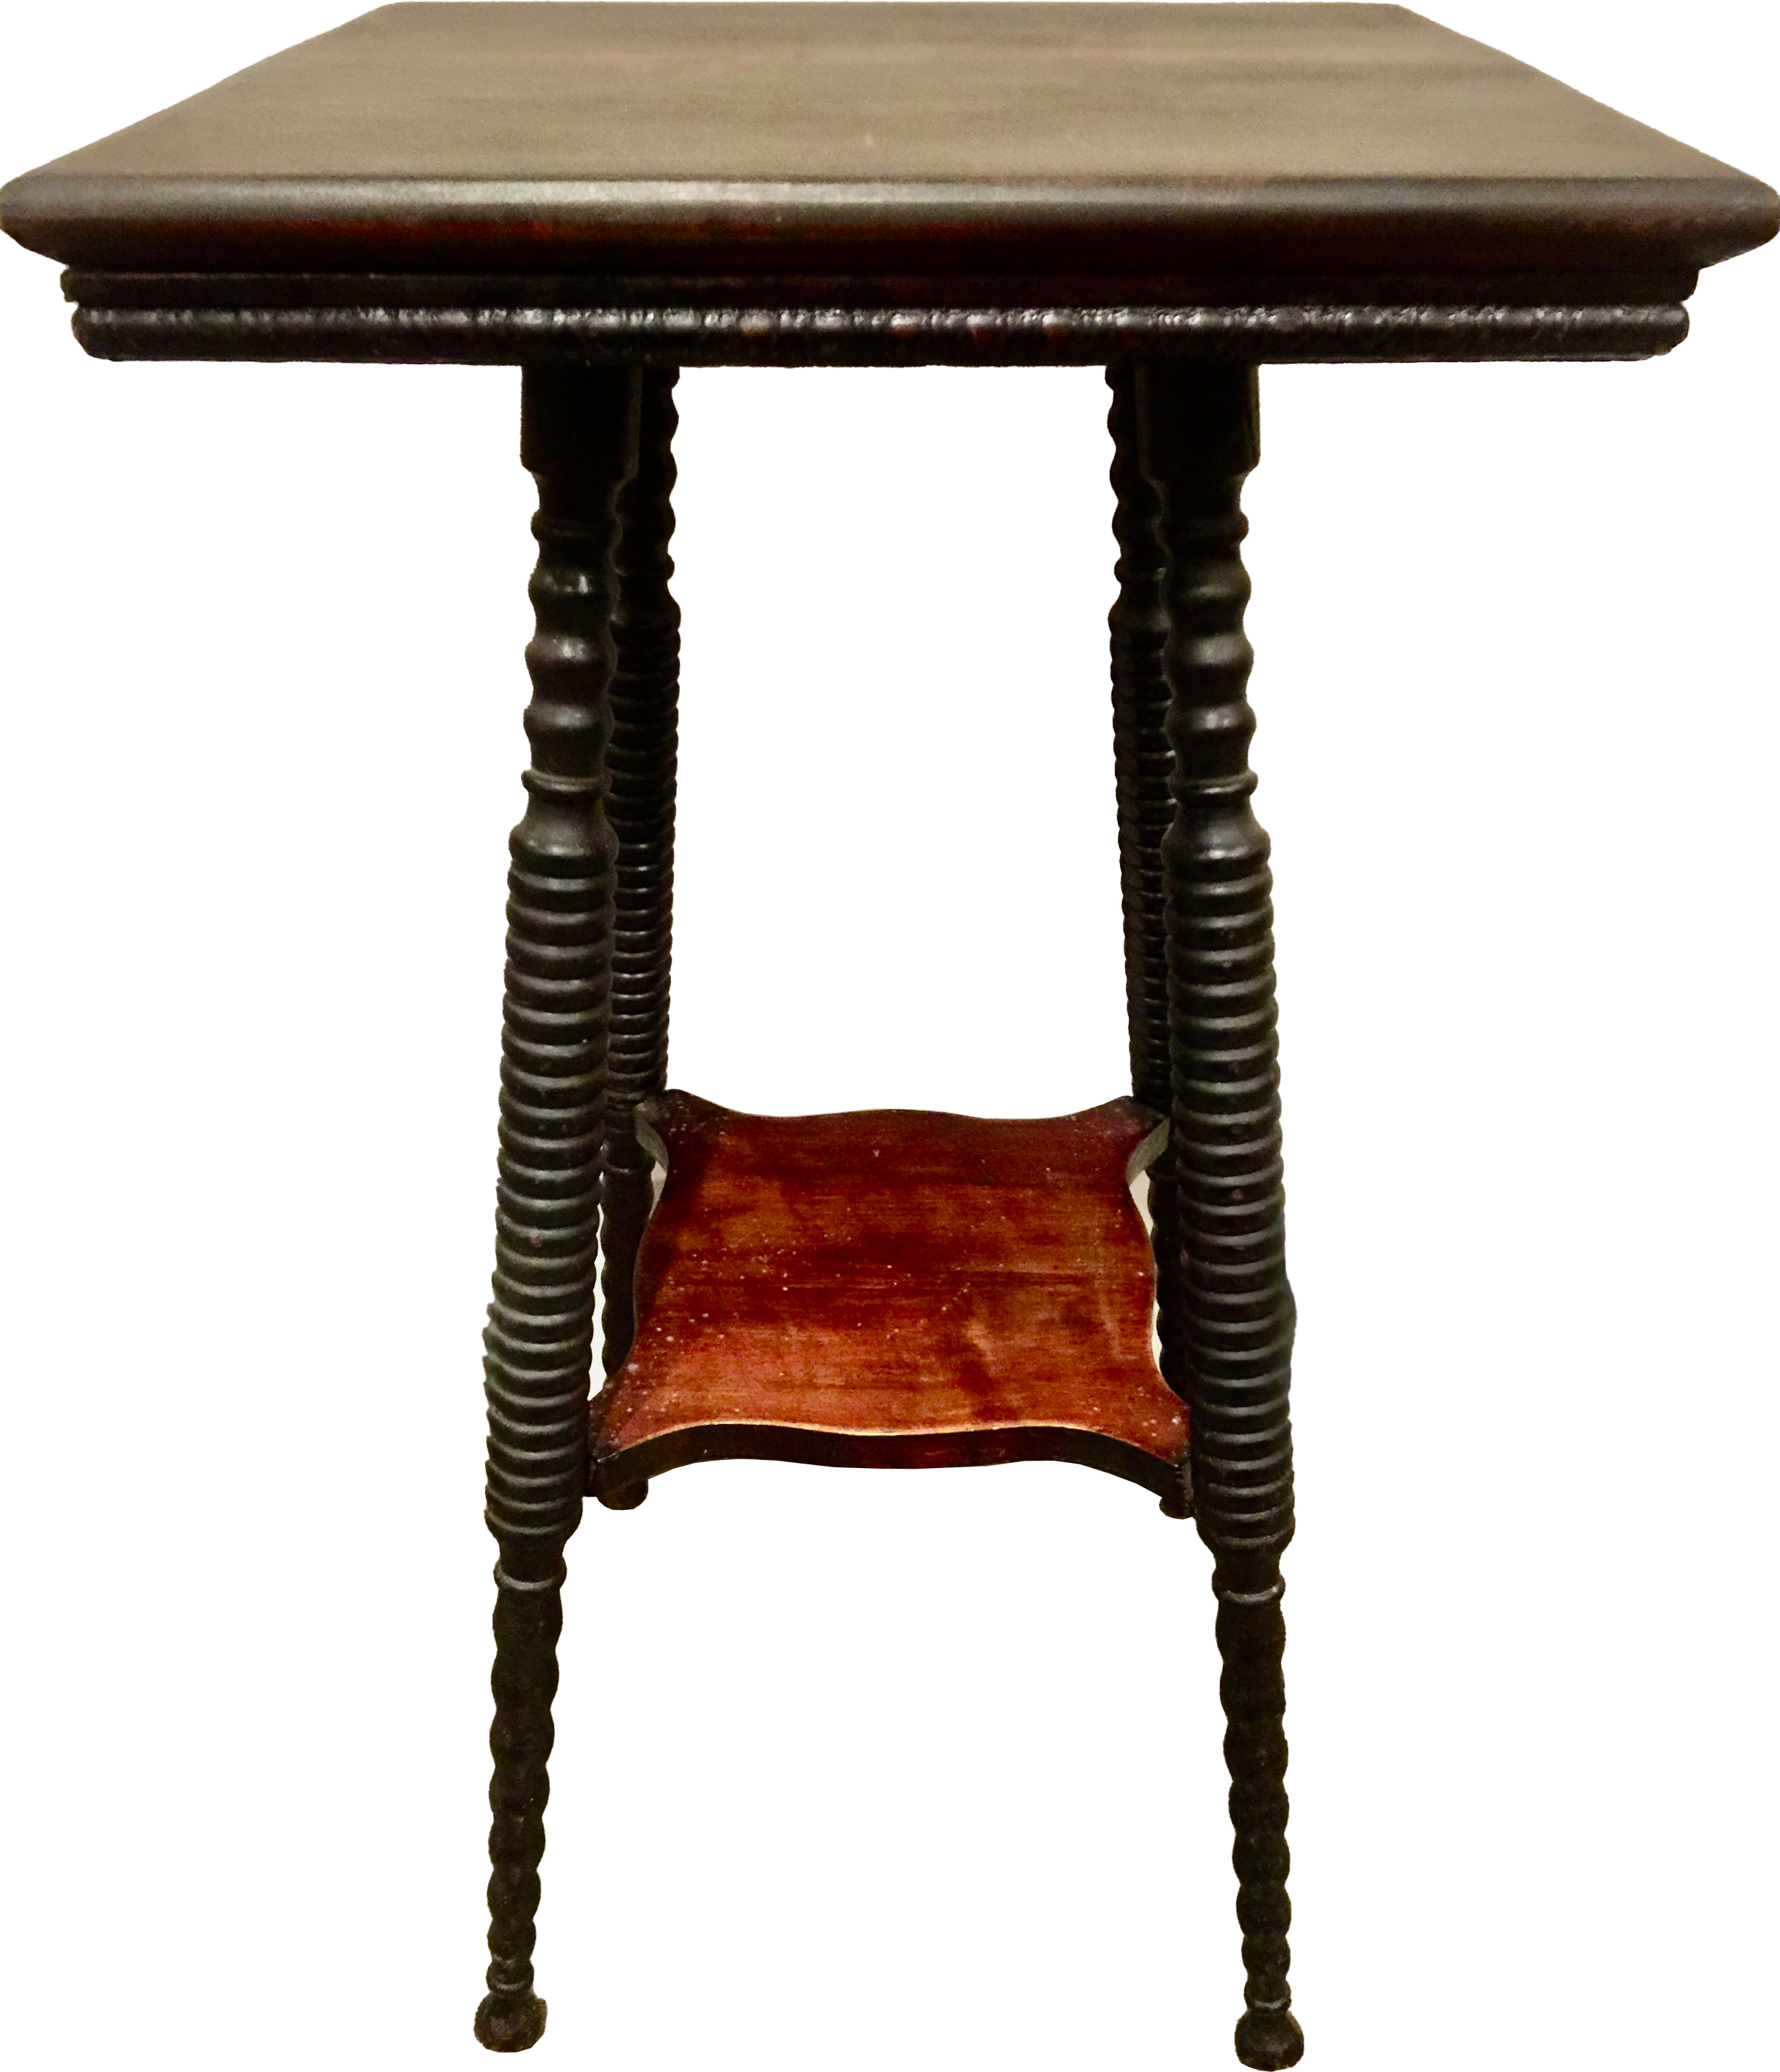 1900s Arts & Crafts Spindle-Legged Table~P77657099